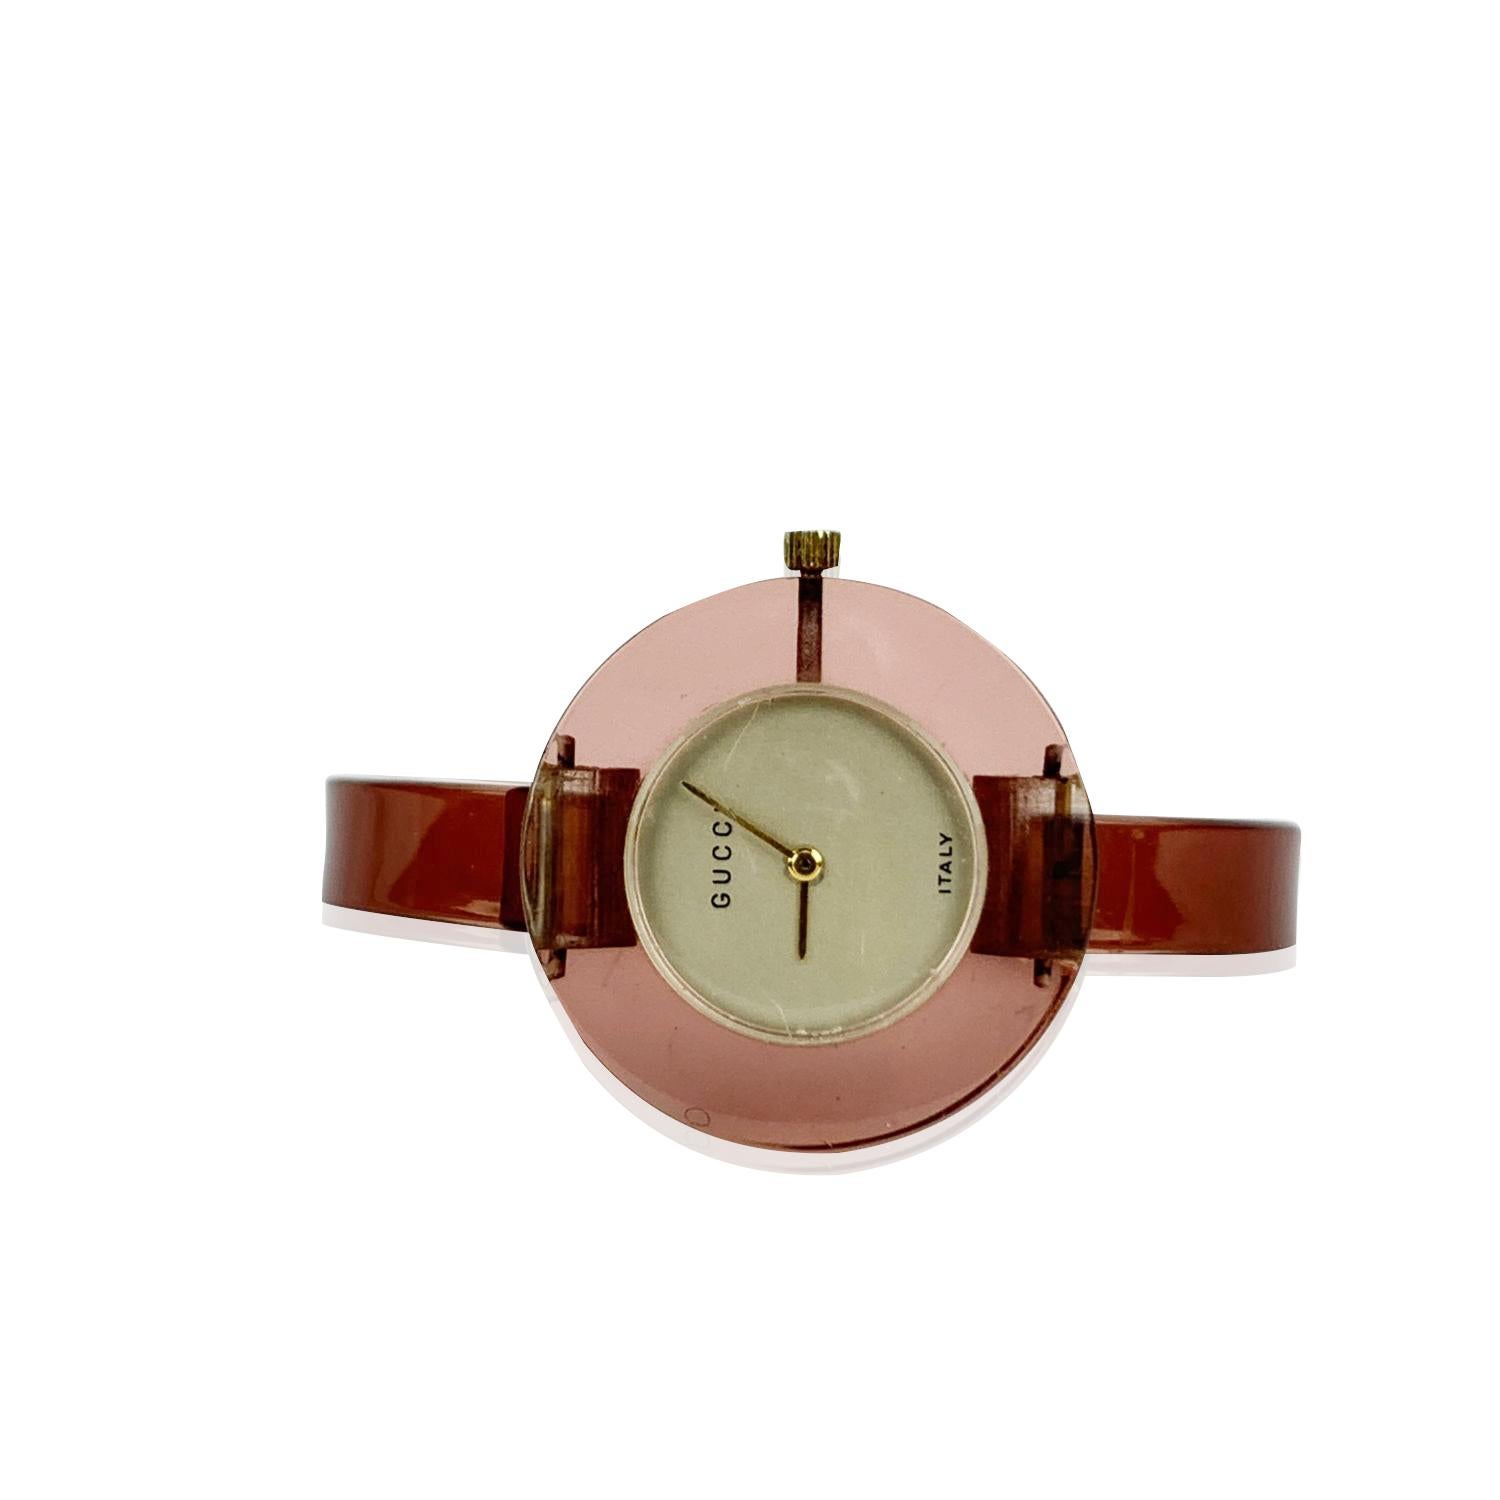 Beautiful vintage bangle wristwatch by GUCCI in translucent pink lucite. 17 Jewels Swiss Wind-Up. Light gold dial. Clasp closure. 'GUCCI' and 'Italy' embossed on the dial. Bracelet diameter: 2.25 Inches - 5,8 cm. Case diameter: 35 mm (38 mm